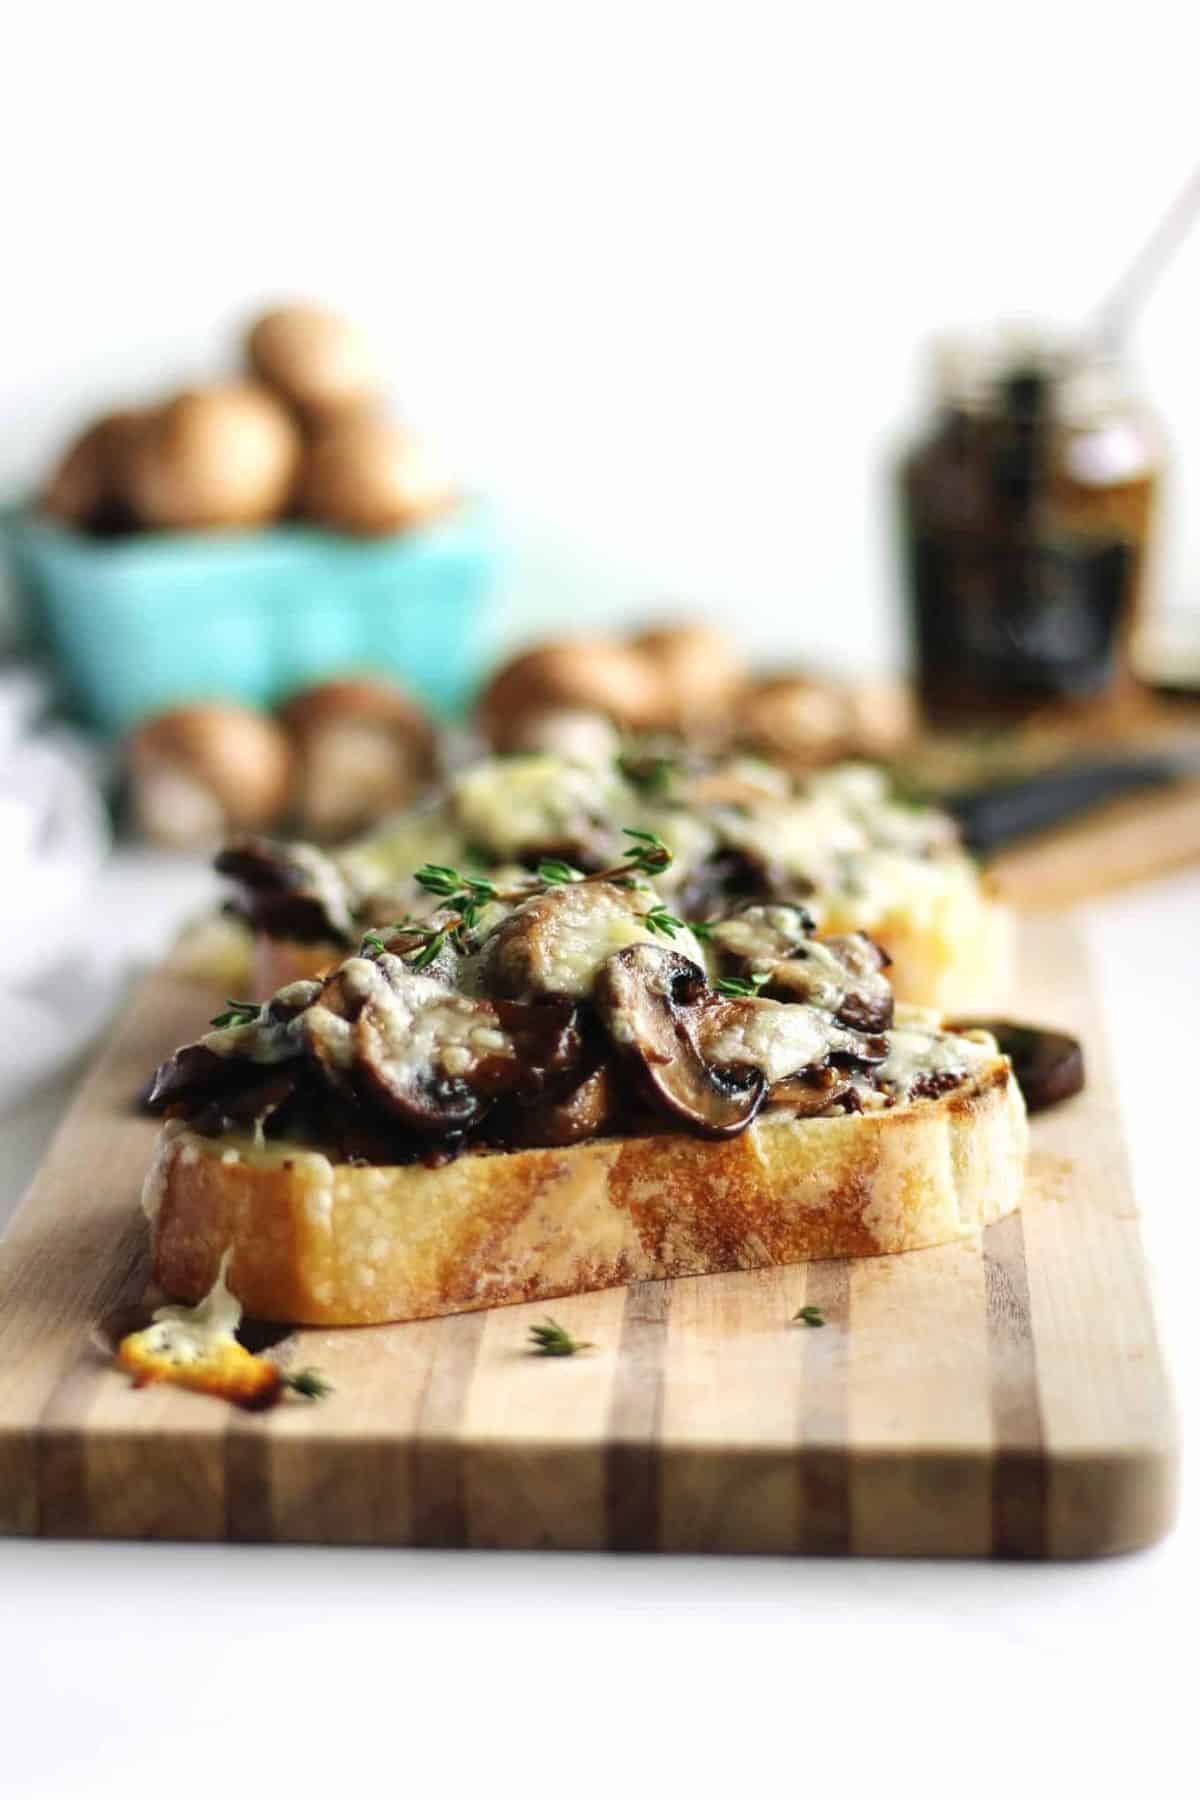 Delicious garlic swiss mushrooms on toast on a wooden cutting board.